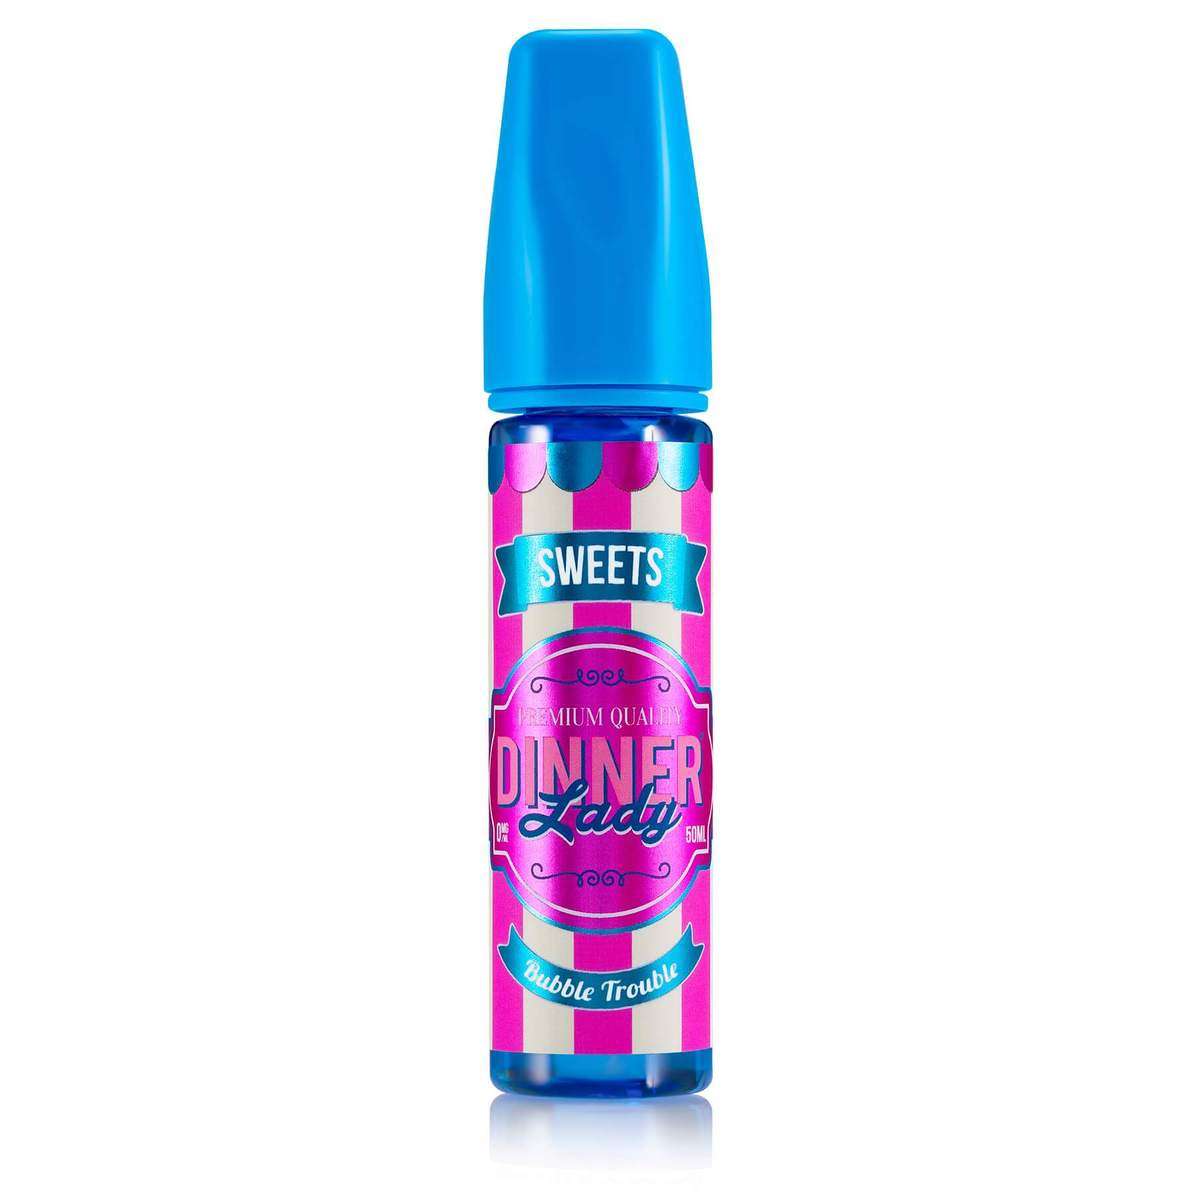  Dinner Lady Sweets - Bubble Trouble - 50ml 